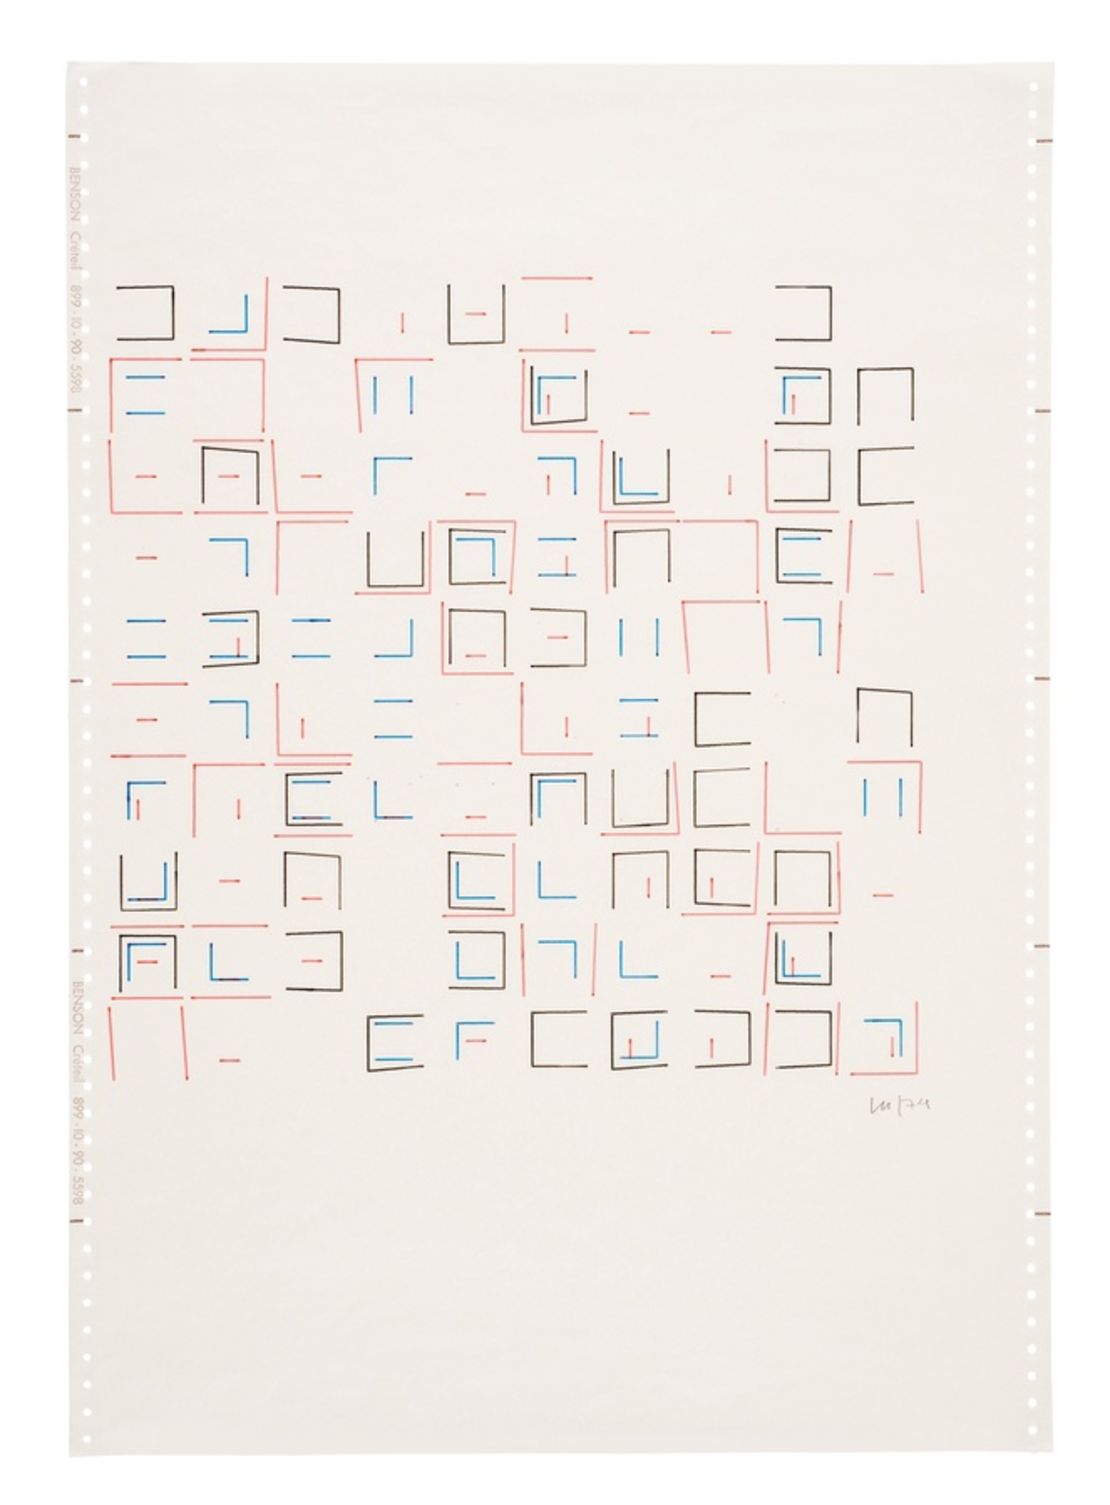 "Untitled" (1972) by Vera Molnár, an early example of computer art. 